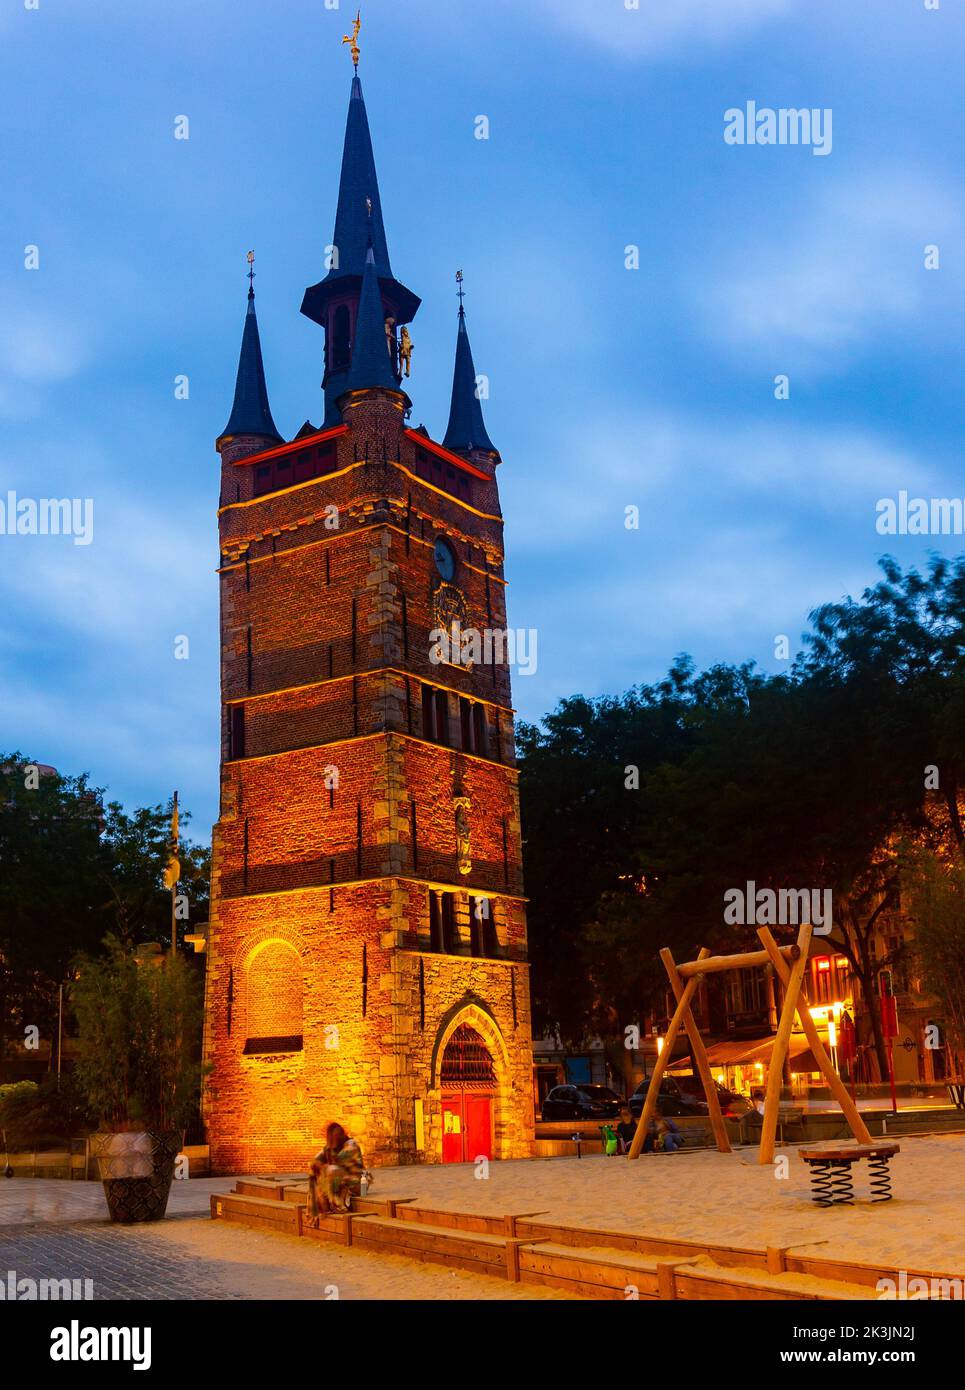 Antique belfry tower in courtrai illuminated by yellow light, Belgium Stock Photo